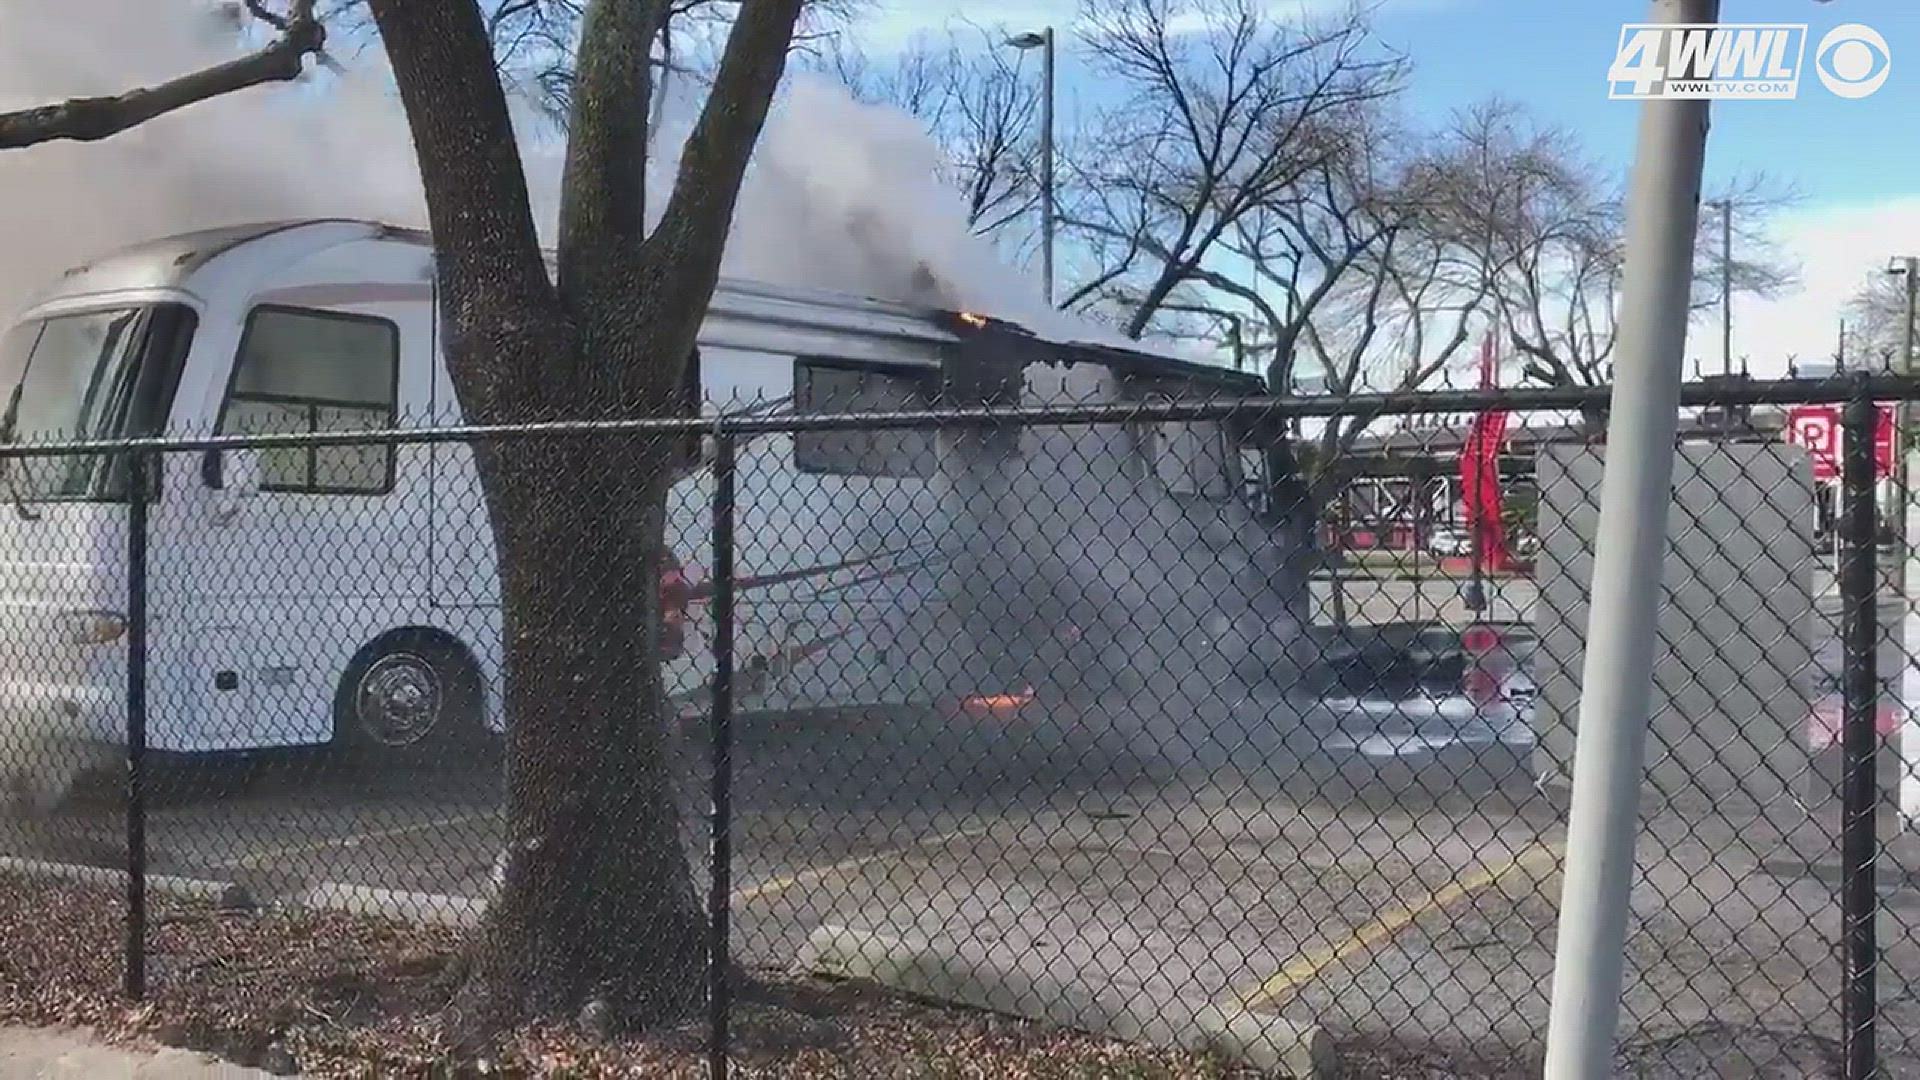 Bama fan's RV goes up in smoke hours before Allstate Sugar Bowl